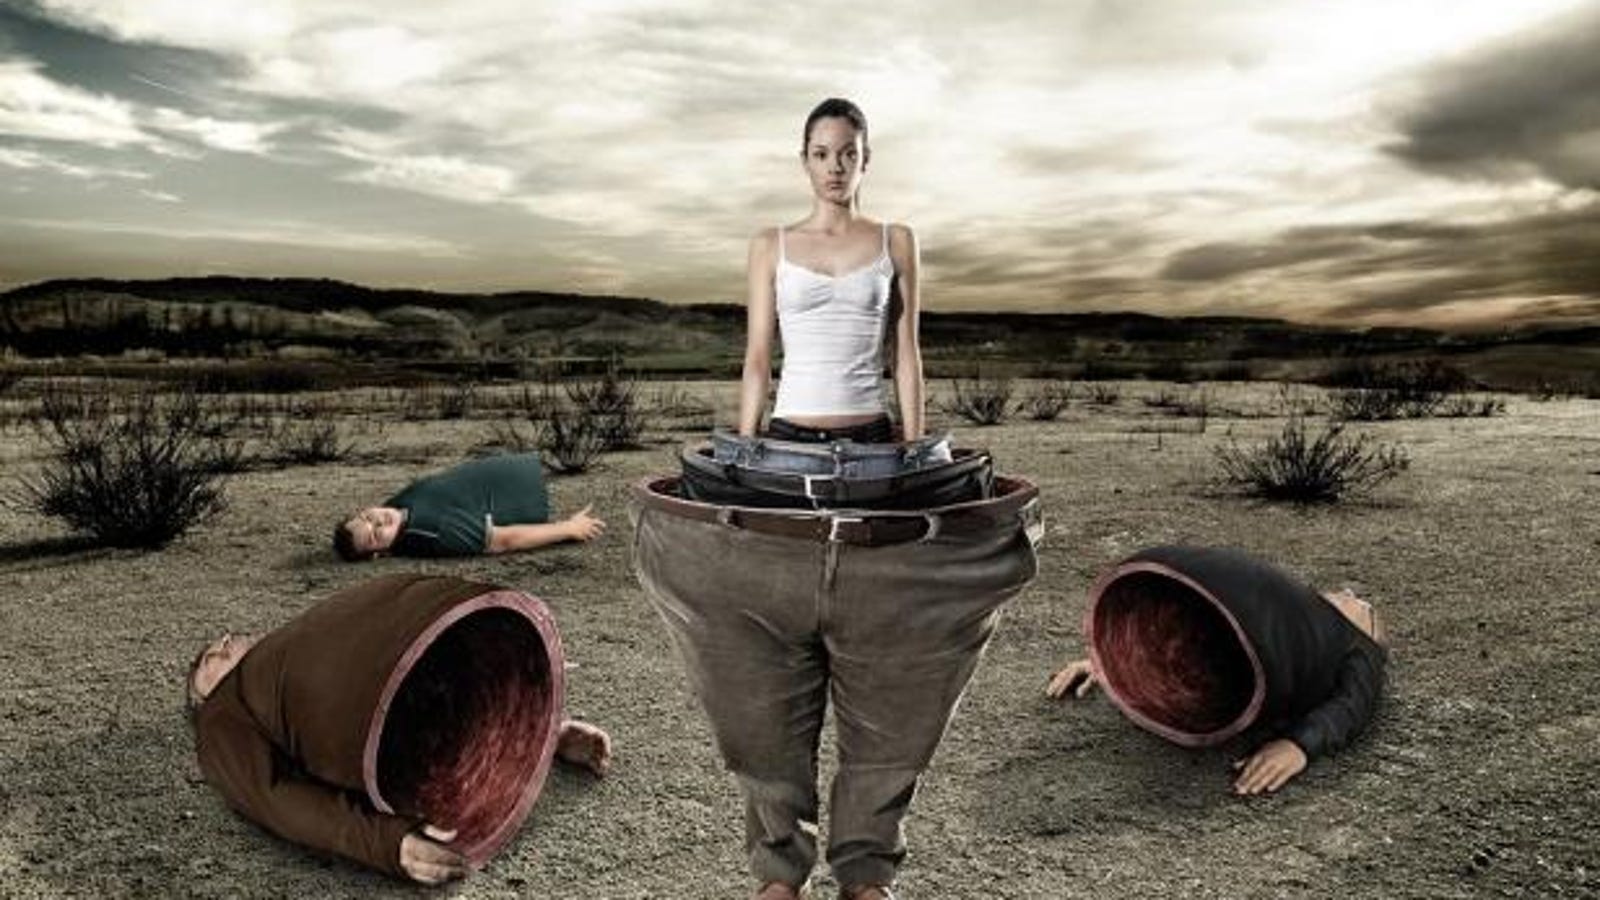 Ps3 Ad Is Aimed At Elusive Fat Guy Looking To Become A Skinny Girl